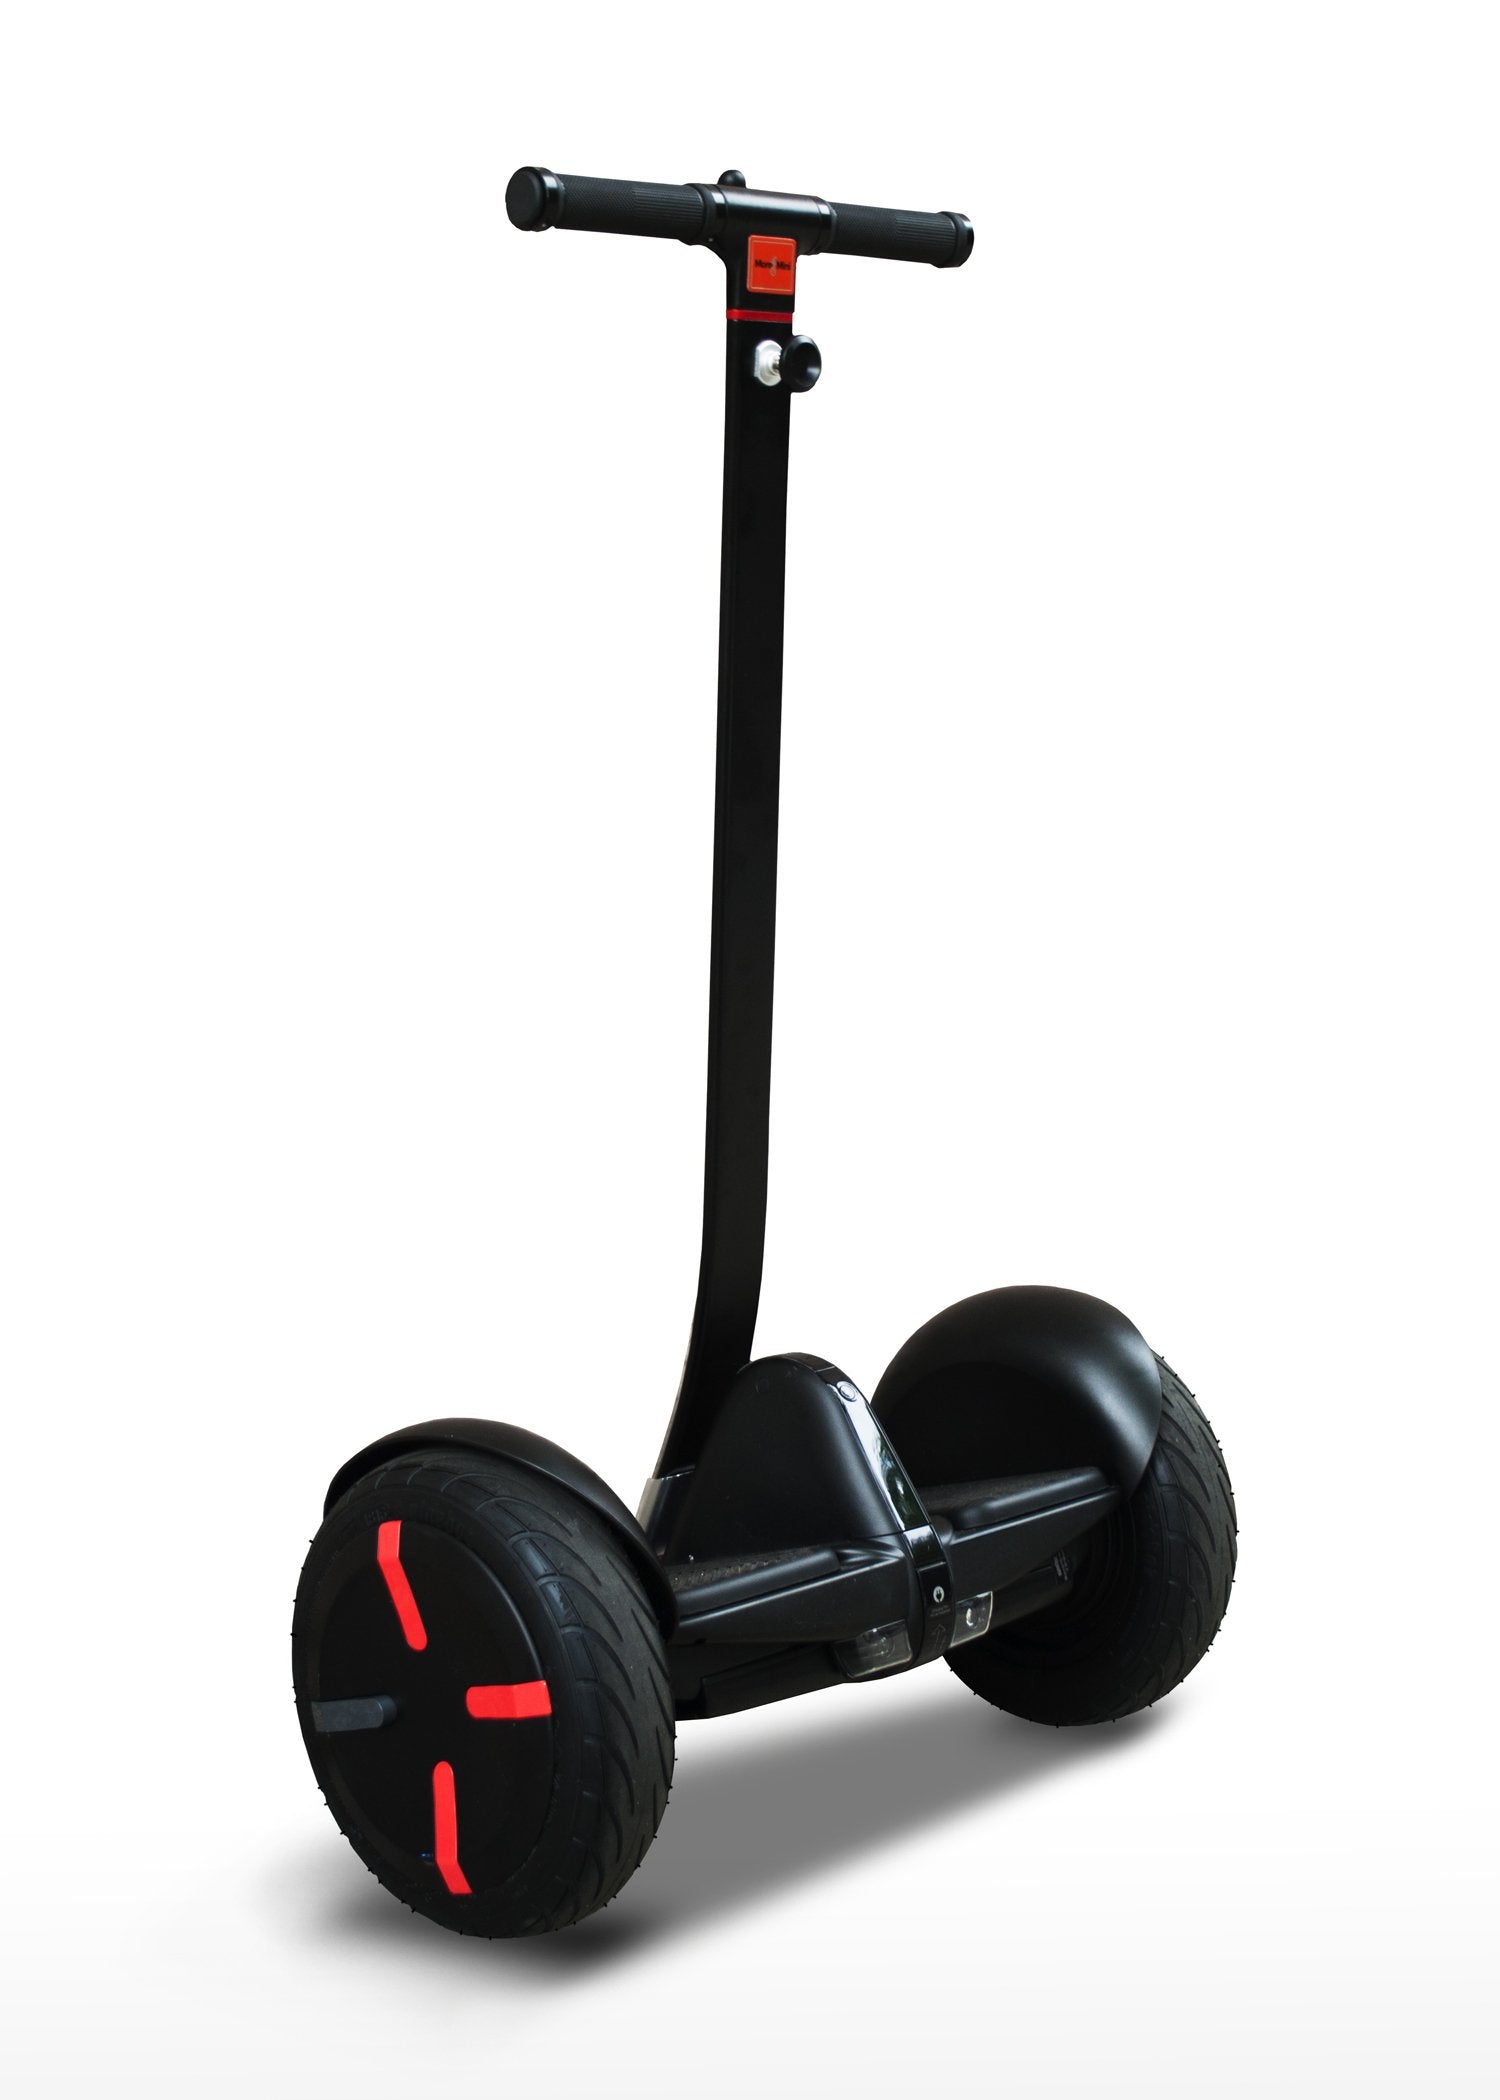 Height Adjustable Handlebar Kit for the MiniPro and Ninebot S. Handlebar attached to the Ninebot Minipro self-balancing hover board scooter.